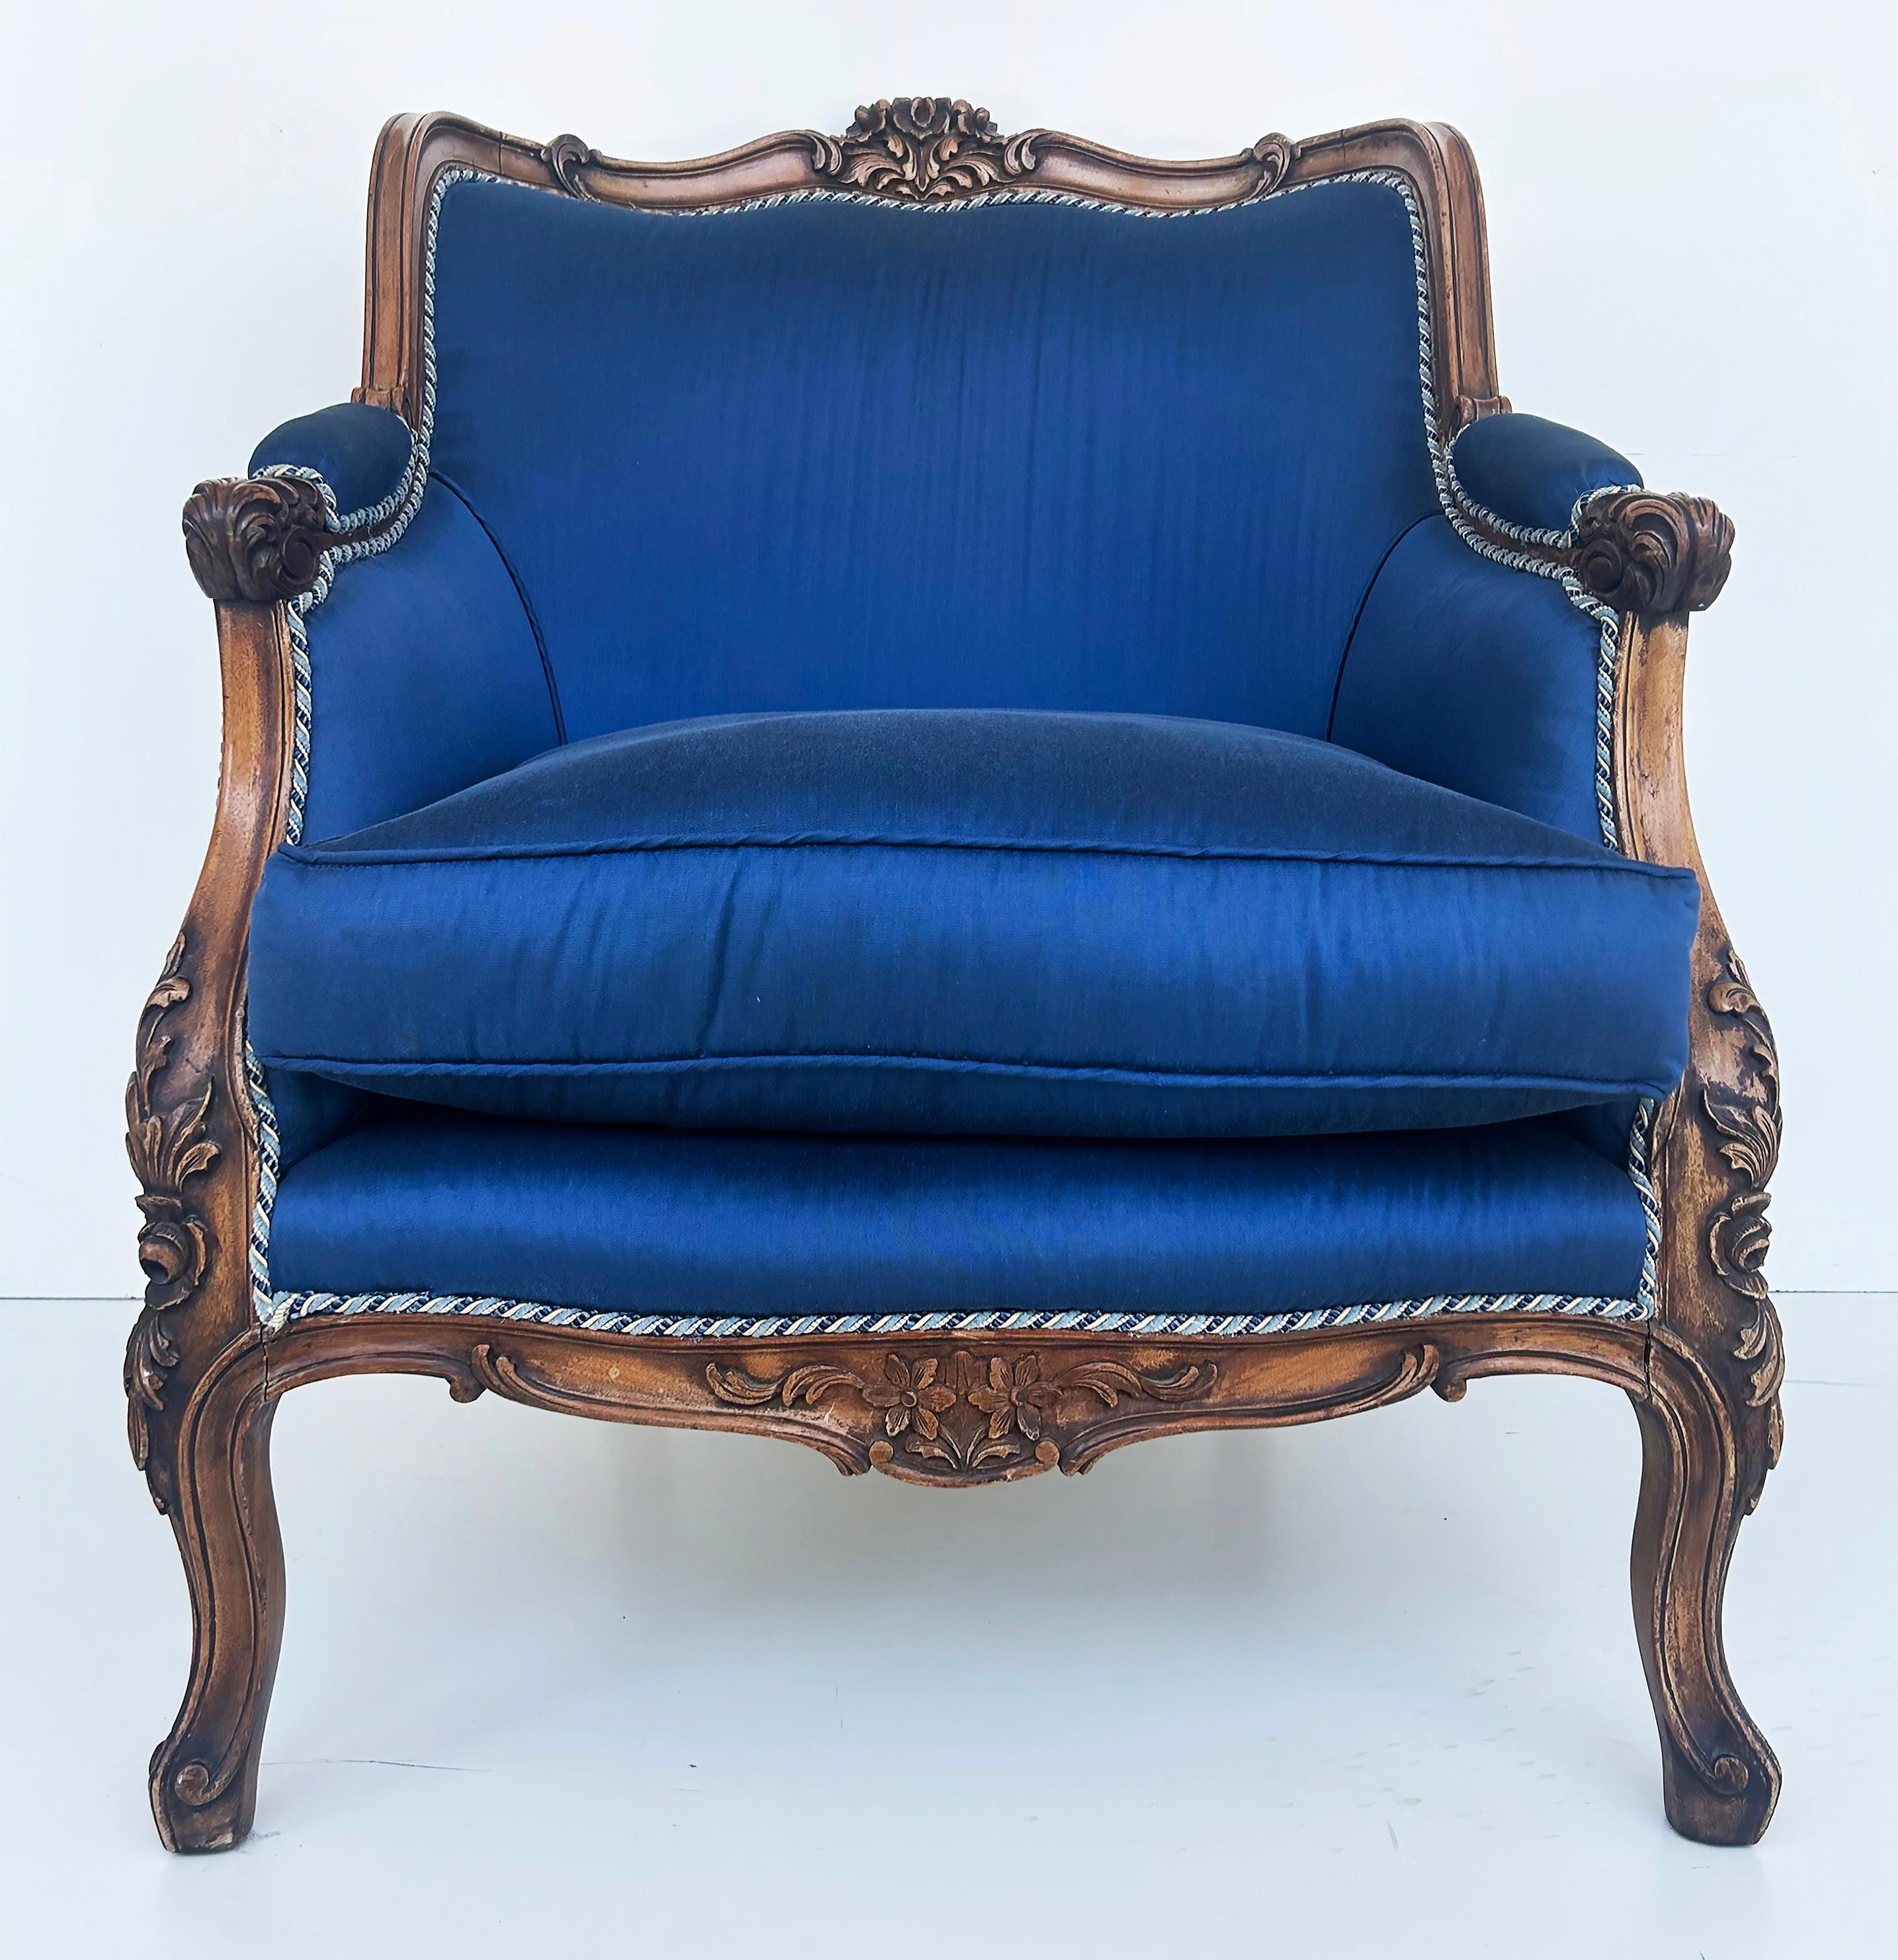 1920s Carved Walnut French Bergeres Armchairs Upholstered in Silk, a Pair 

Offered for sale is a pair of  French hand-carved Walnut Bergere club chairs that have been beautifully upholstered in blue silk with contrasting welting.  These wonderful